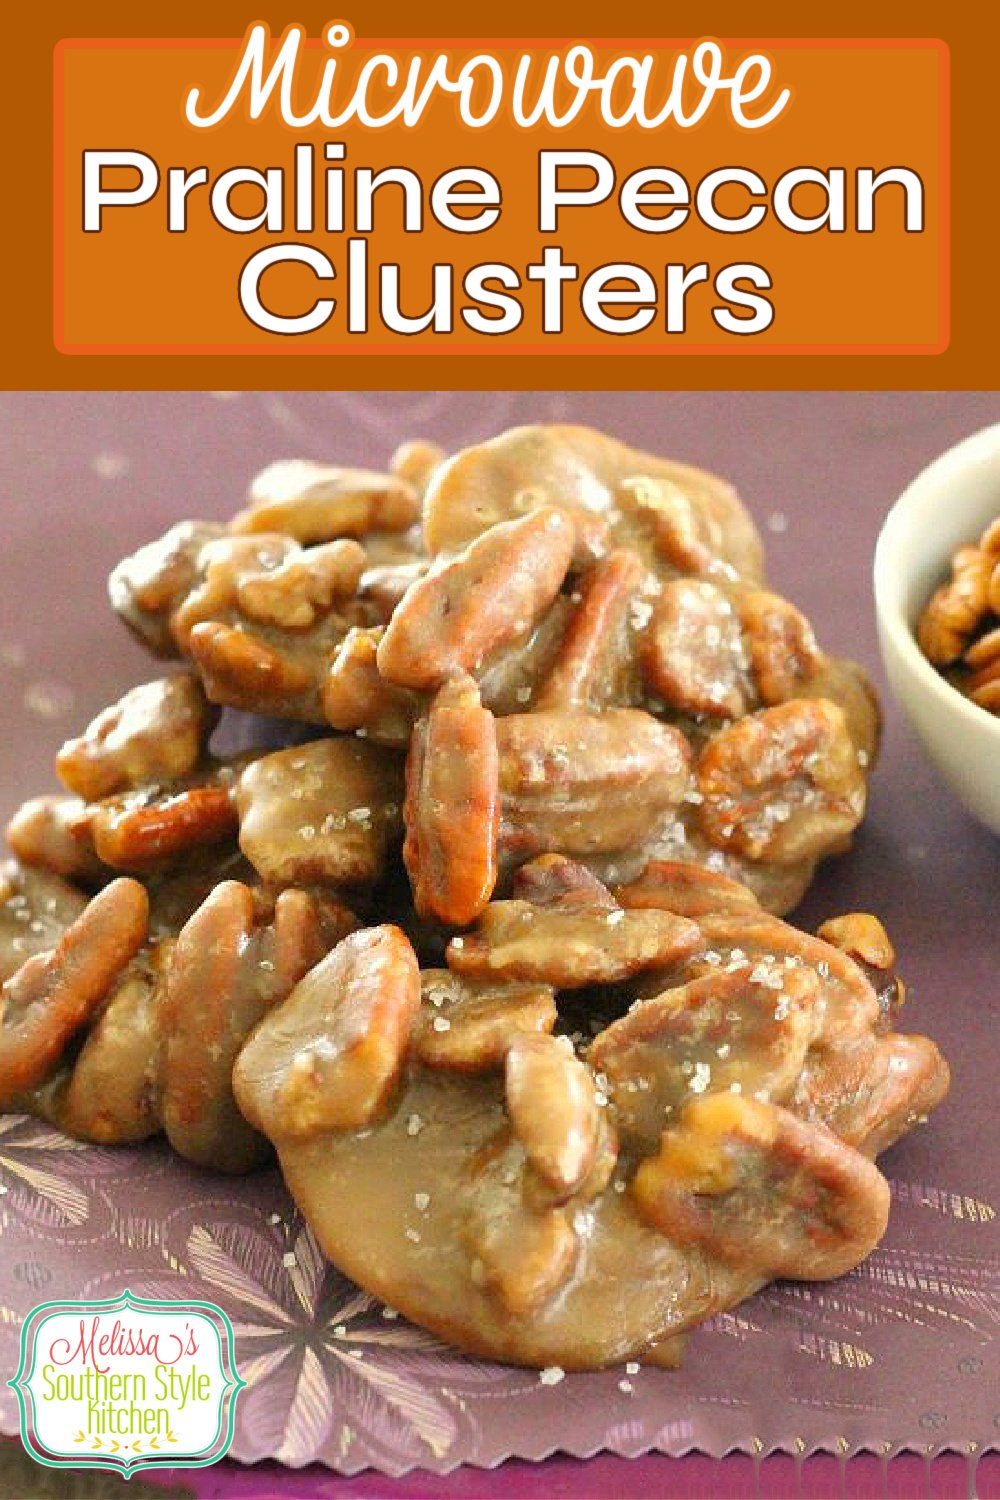 Make these scrumptious Sea Salted Praline Pecan Clusters in the microwave in no time flat #pralines #pralinepecans #pralinepecanclusters #candy #southernpralines #desserts #dessertfoodrecipes #southernfood #southernrecipes #holidayrecipes #easter #christmas #melissassouthernstylekitchen via @melissasssk